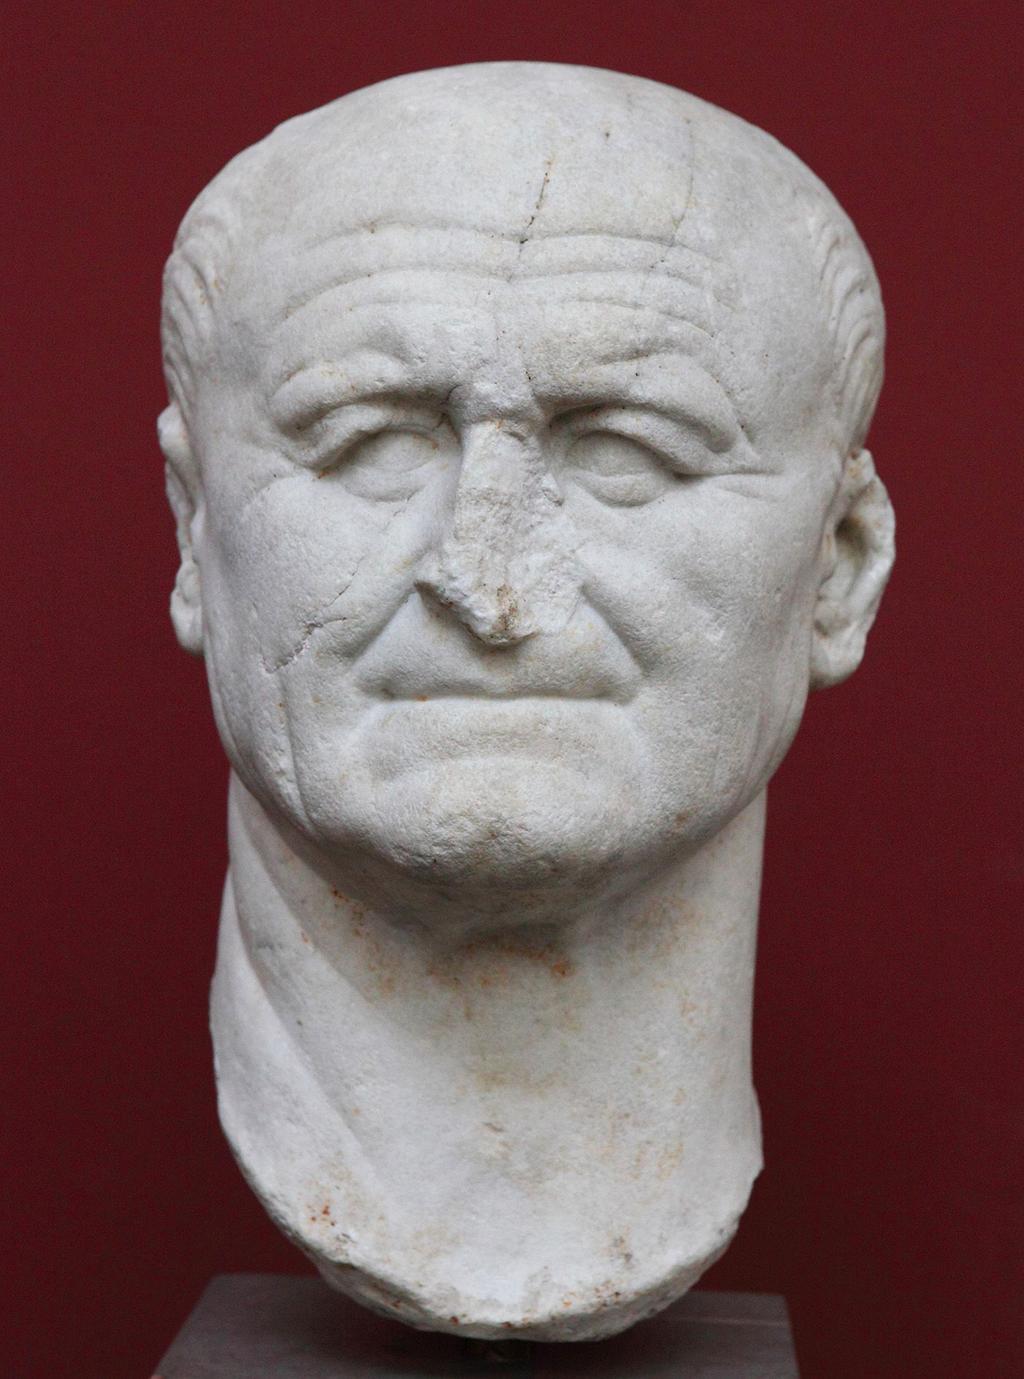 Flavian Portraiture Portrait of Vespasian Marble 75 CE Aided by political reasons Vespasian wished to distance himself from the extravagance of Nero s reign with simple portraiture, returning to the